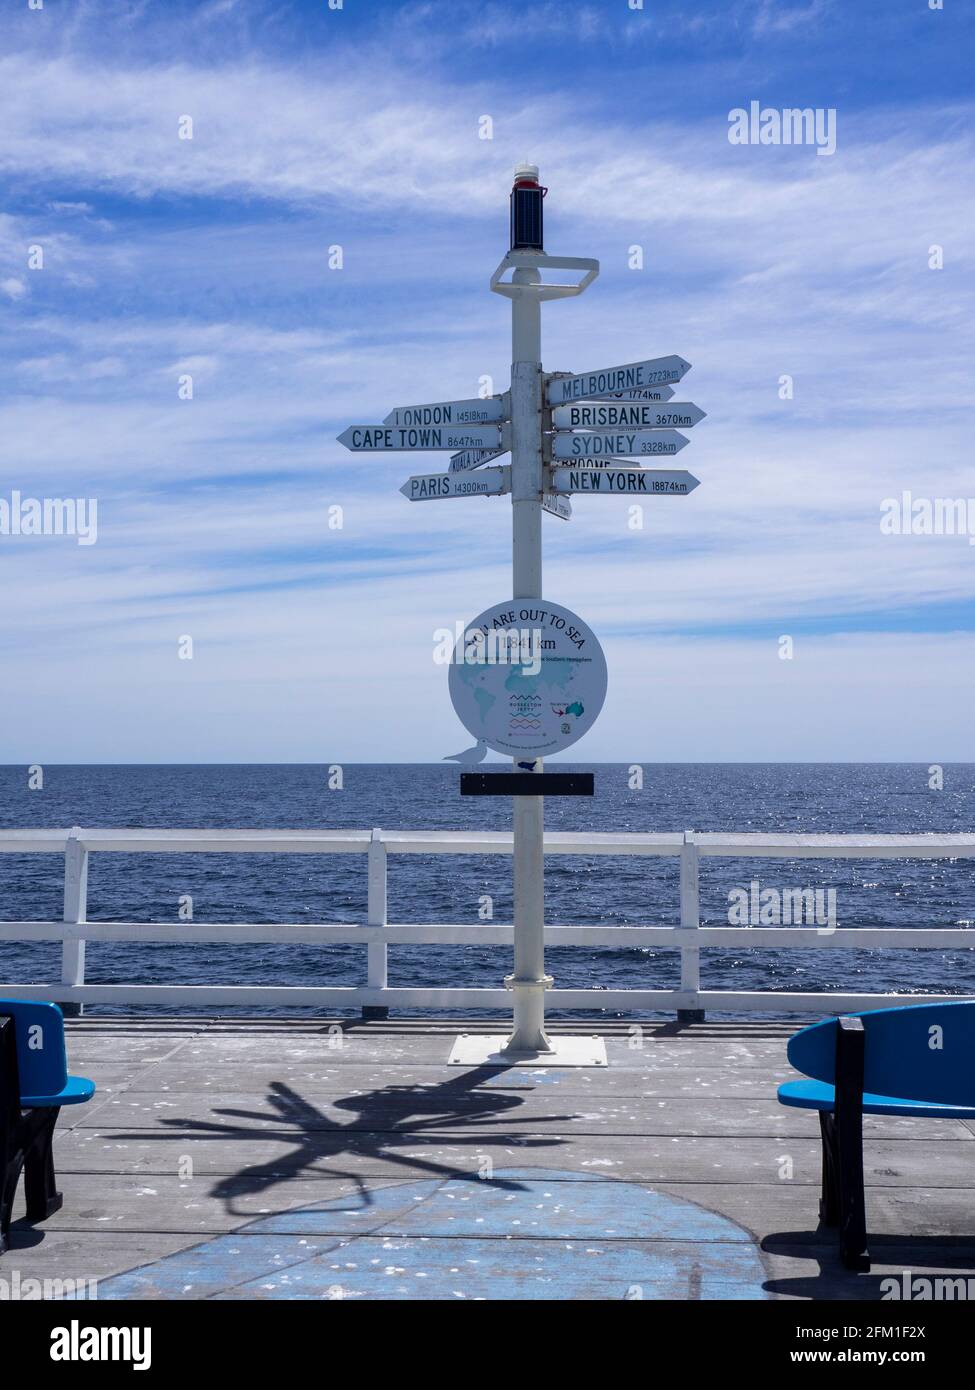 Direction dial at the end of Busselton Jetty the longest timber-piled jetty in the southern hemisphere, Western Australia Stock Photo